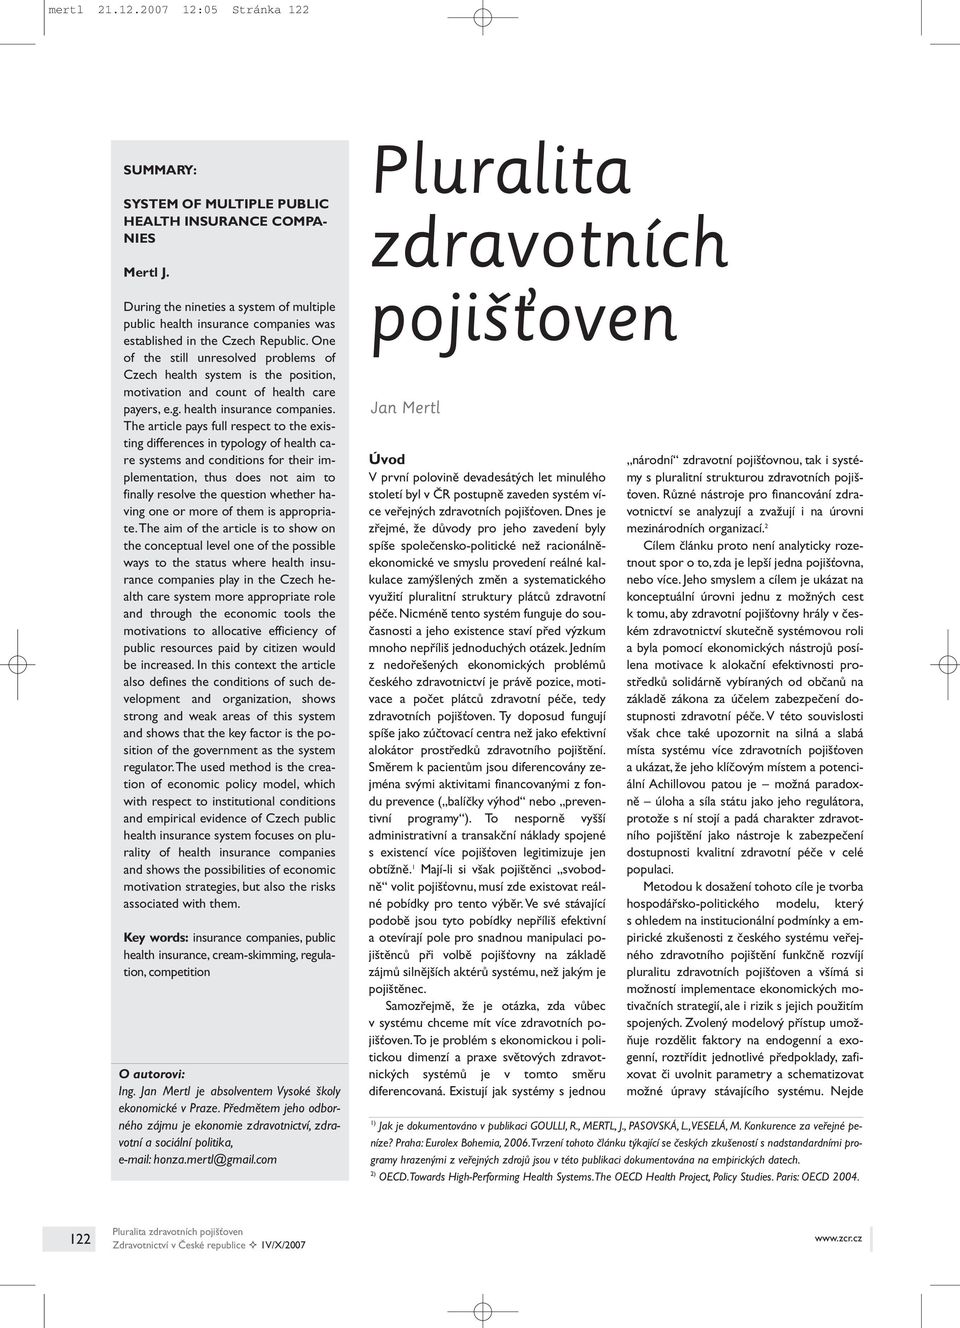 One of the still unresolved problems of Czech health system is the position, motivation and count of health care payers, e.g. health insurance companies.